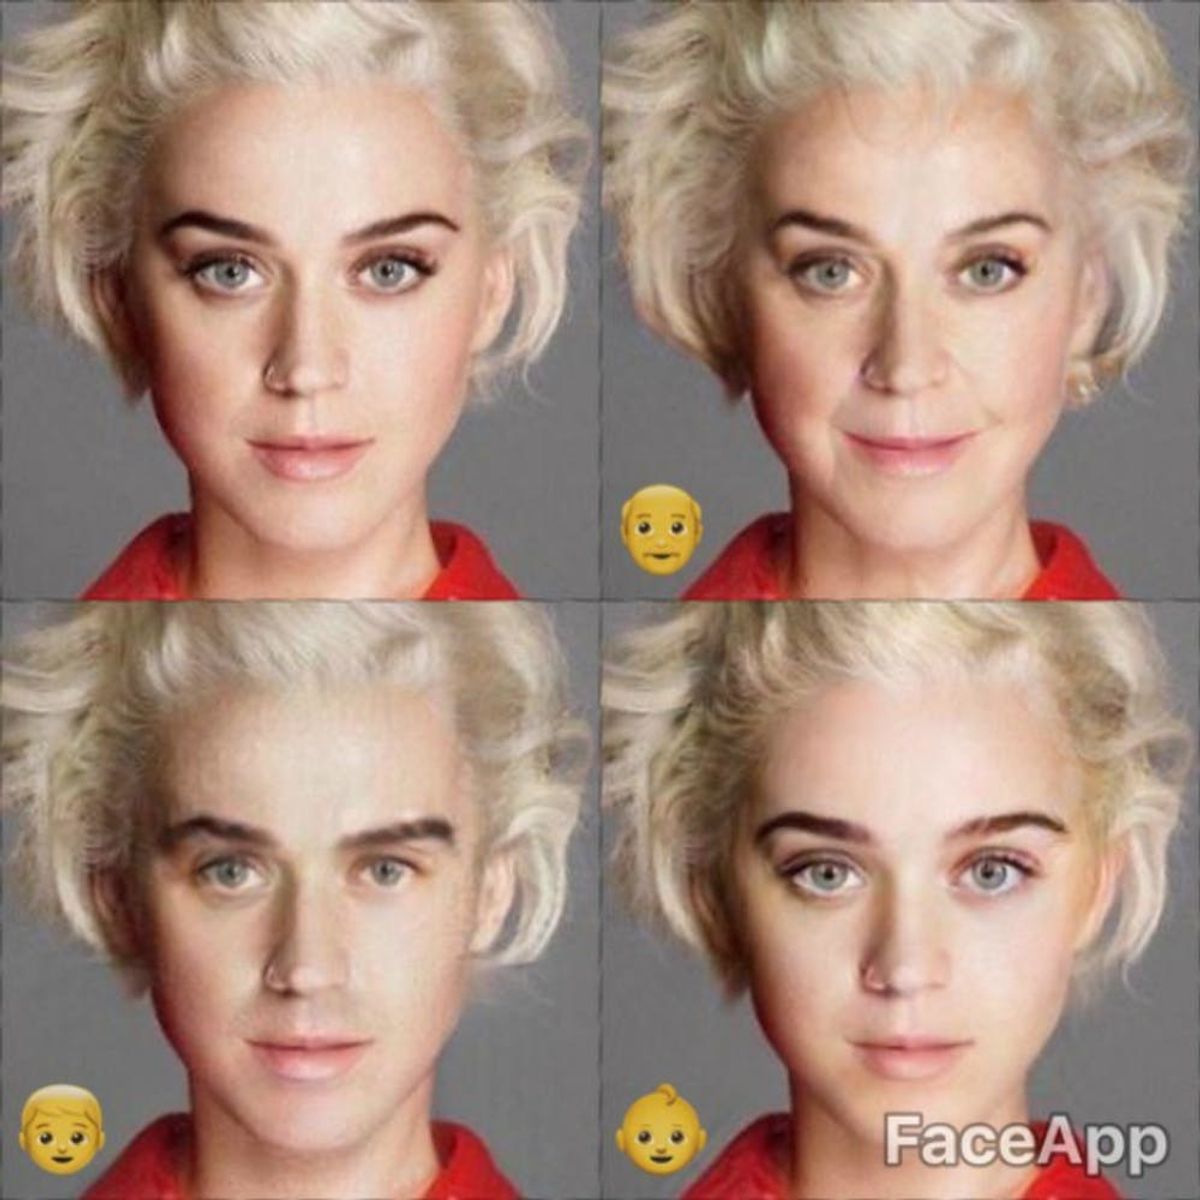 The FaceApp Filter Made These Celebs Look EXACTLY Like Other Celebs